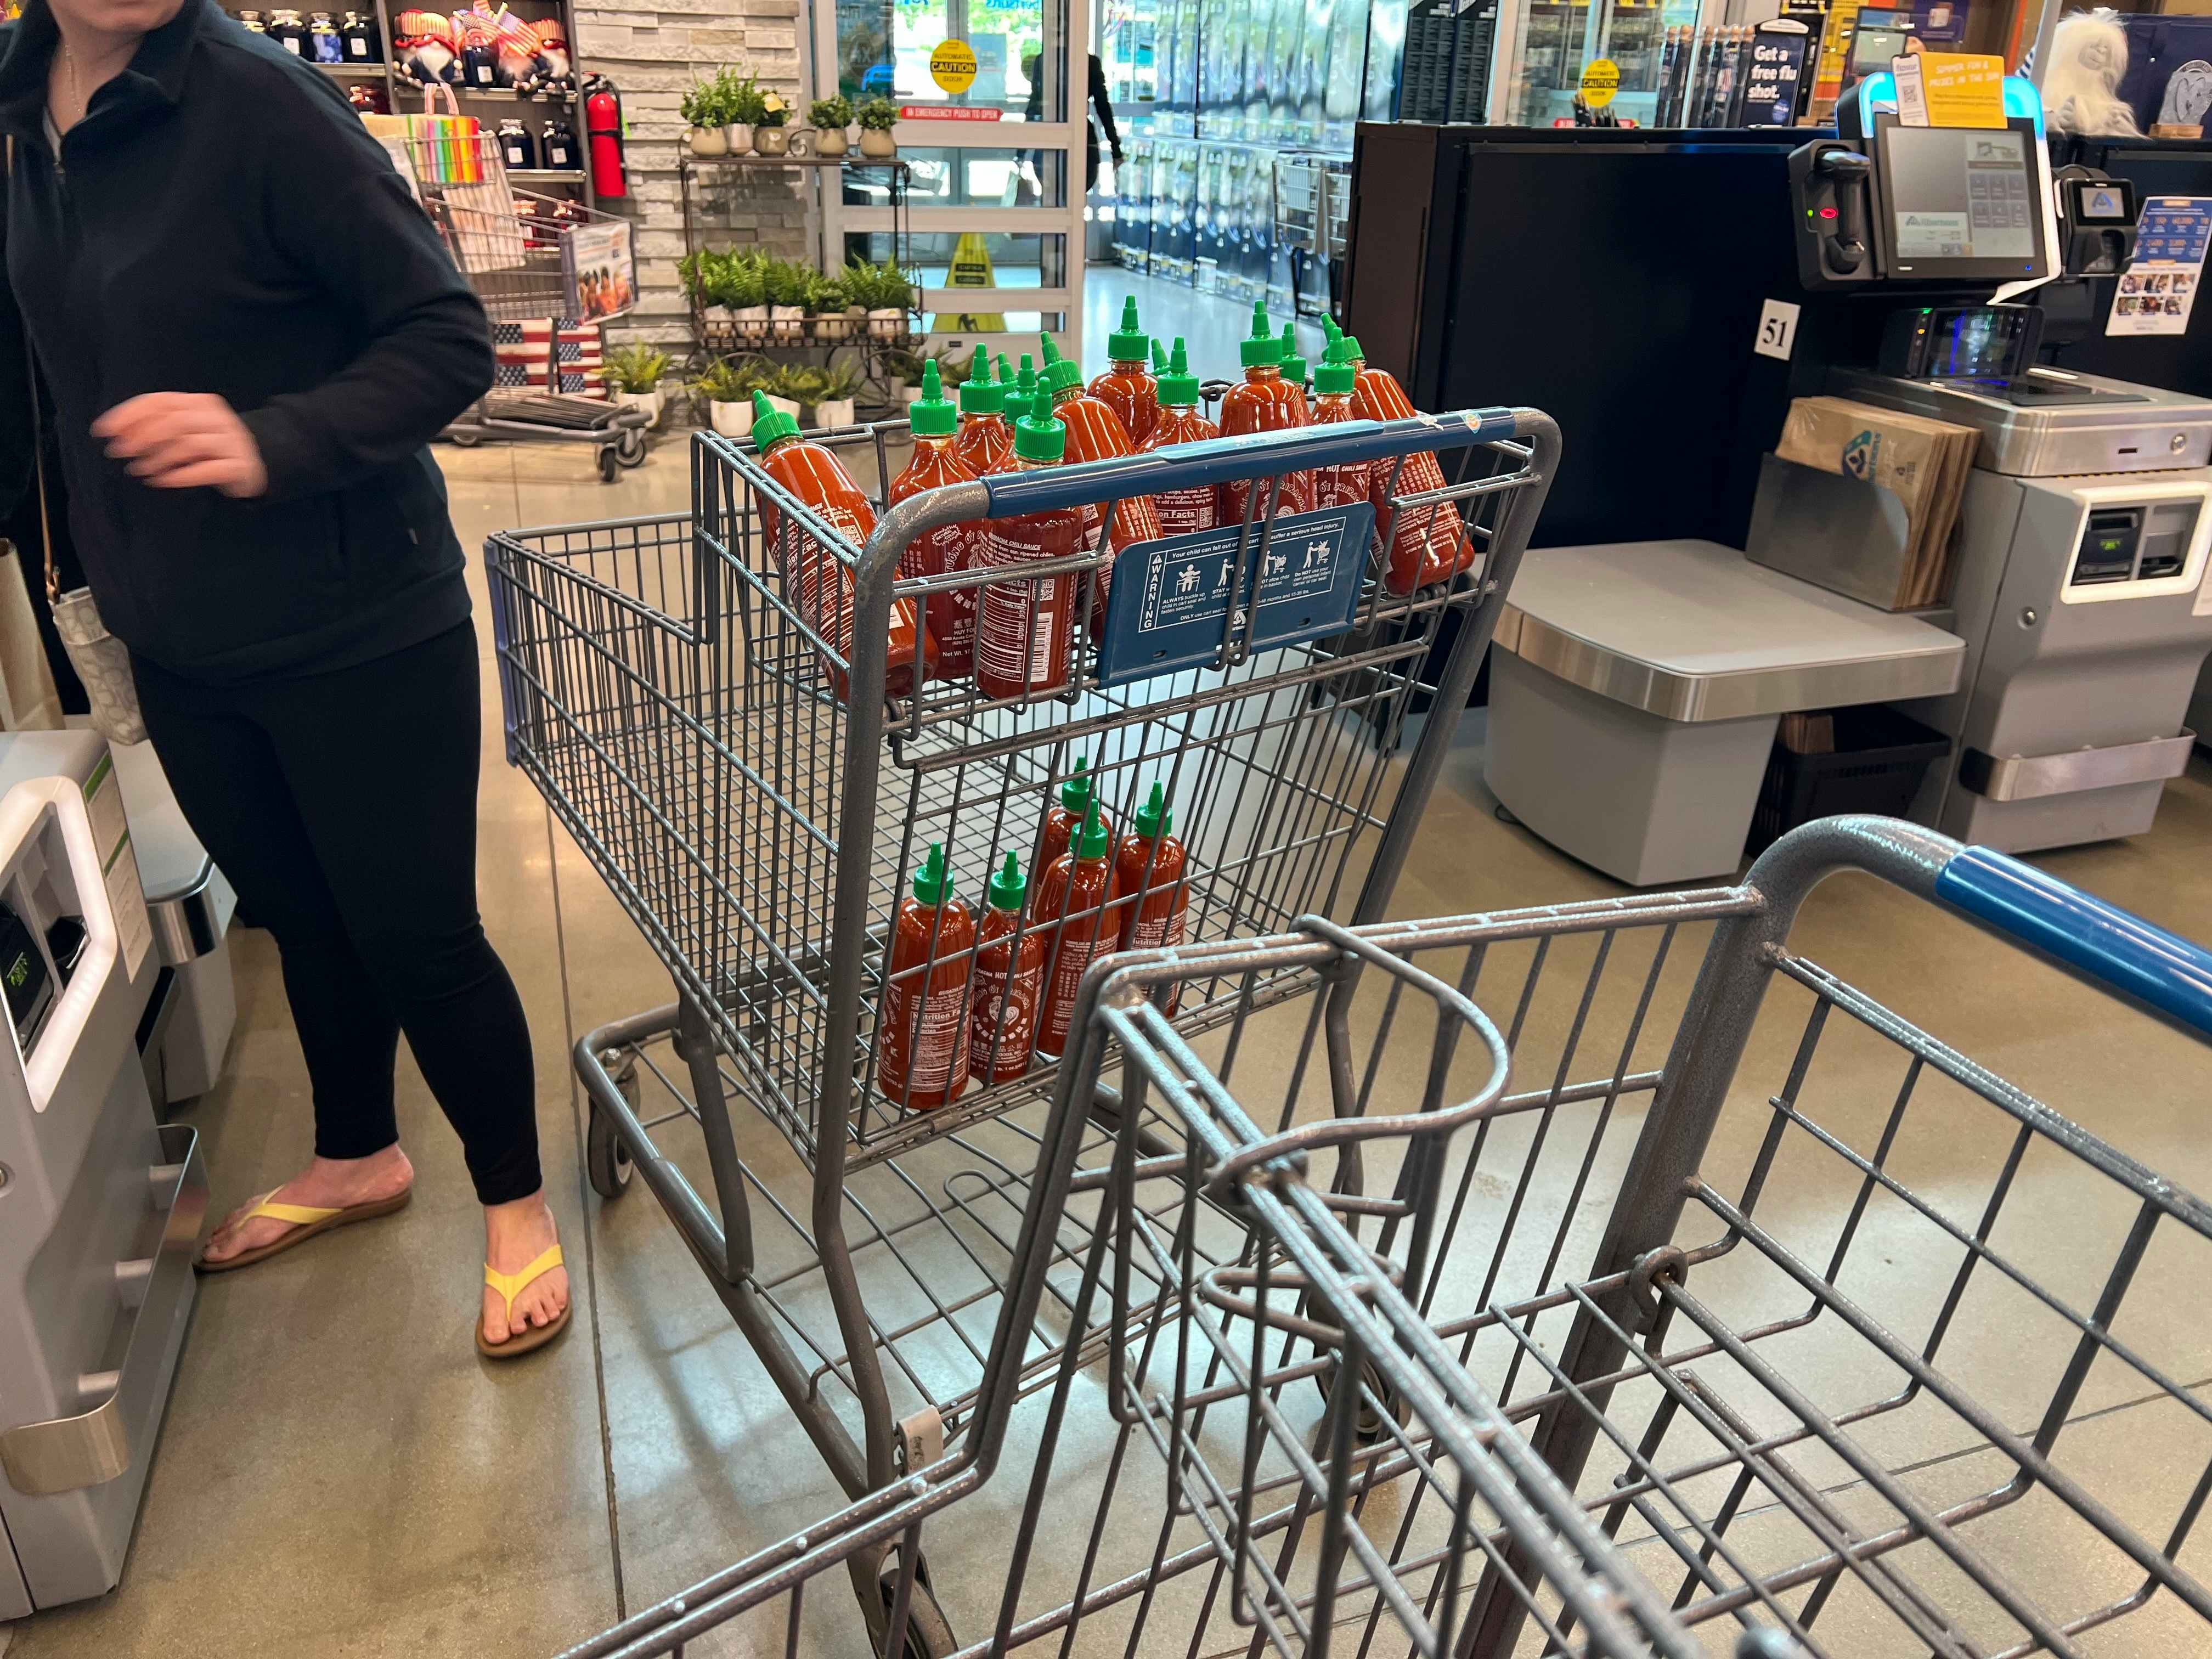 A customer with a cart full of Sriracha bottles in the line at Albertson's checkout.